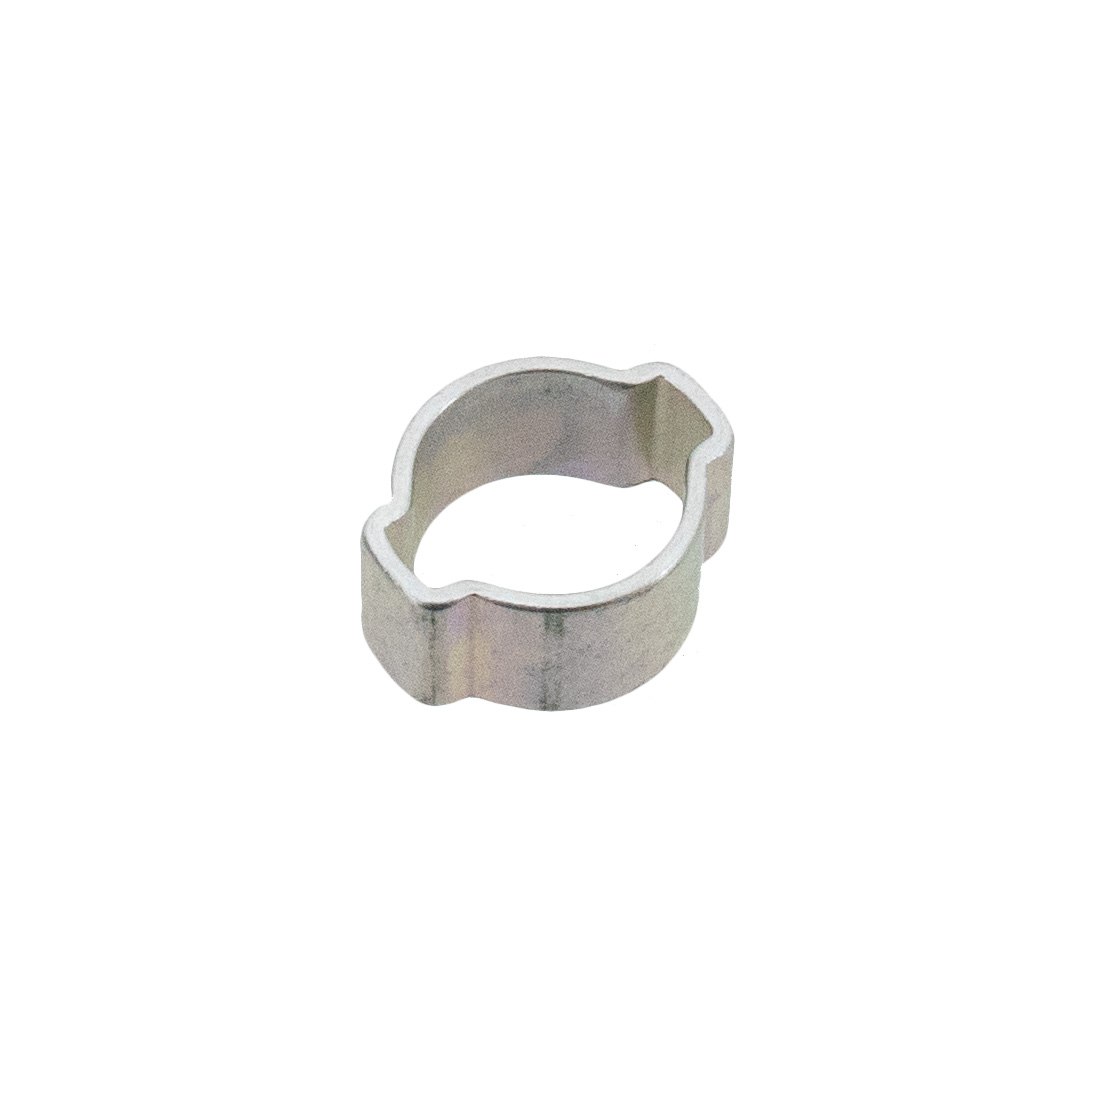 World Enterprises Clamps - Low Profile - Angled Bottom View